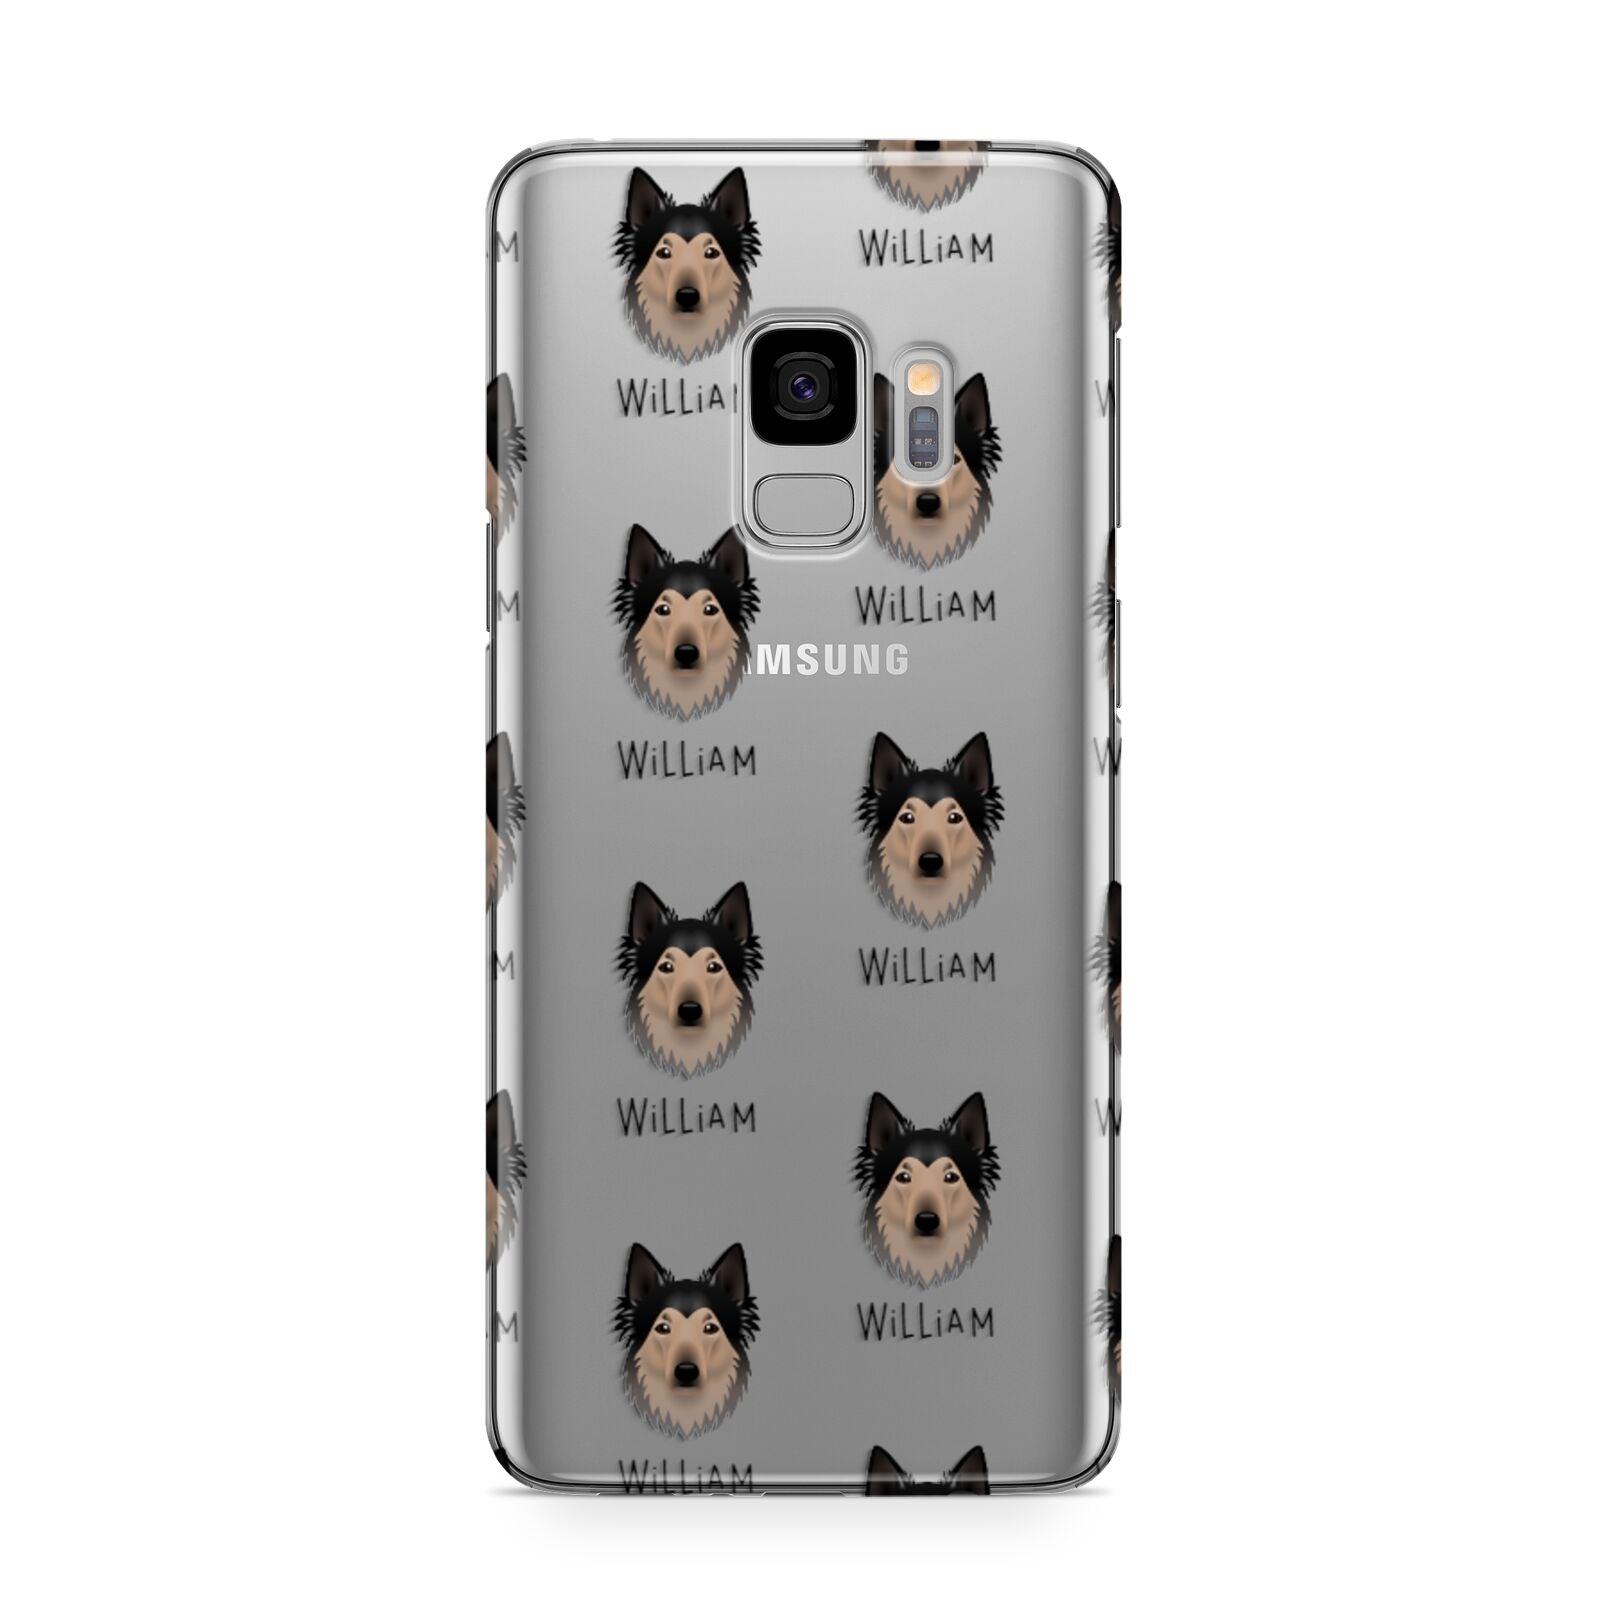 Shollie Icon with Name Samsung Galaxy S9 Case